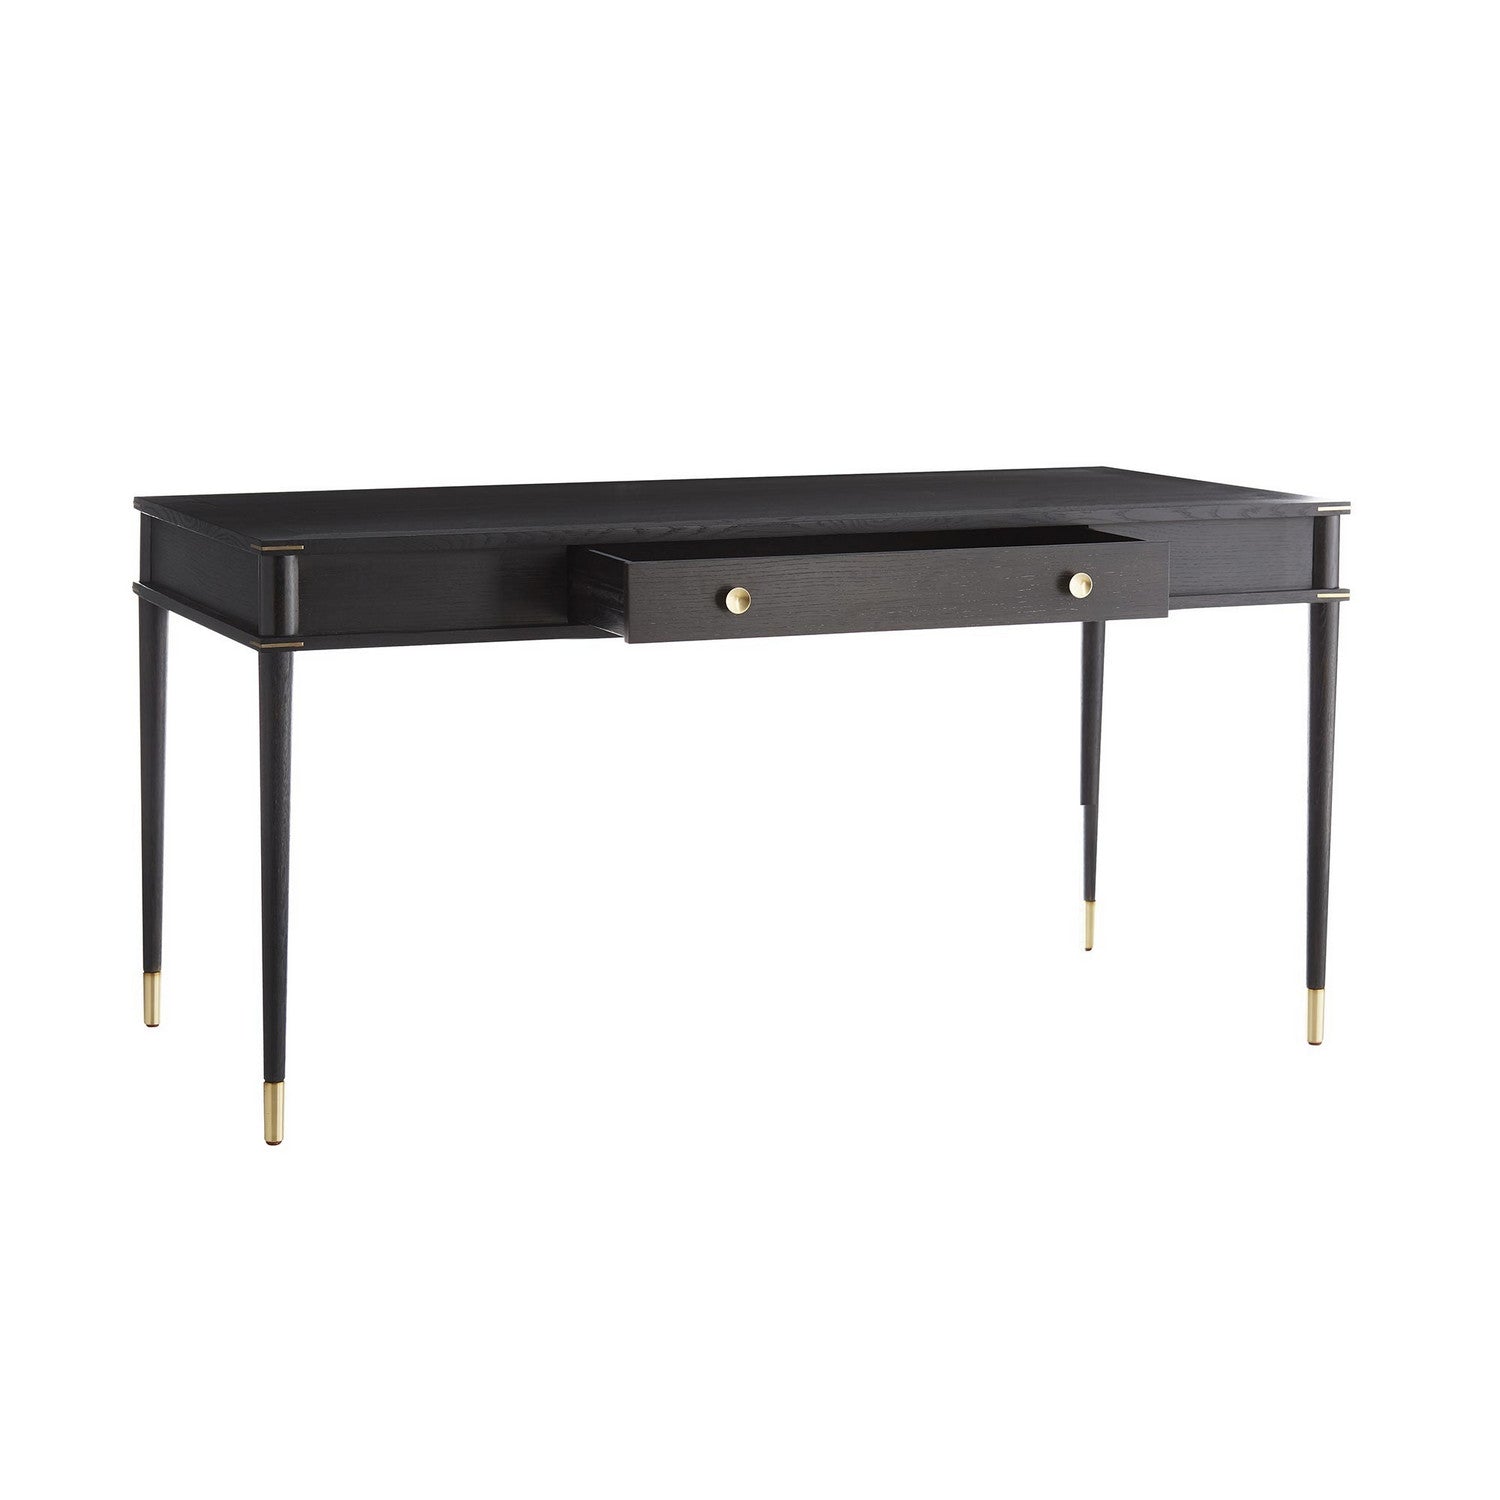 Desk from the Jobe collection in Ebony finish